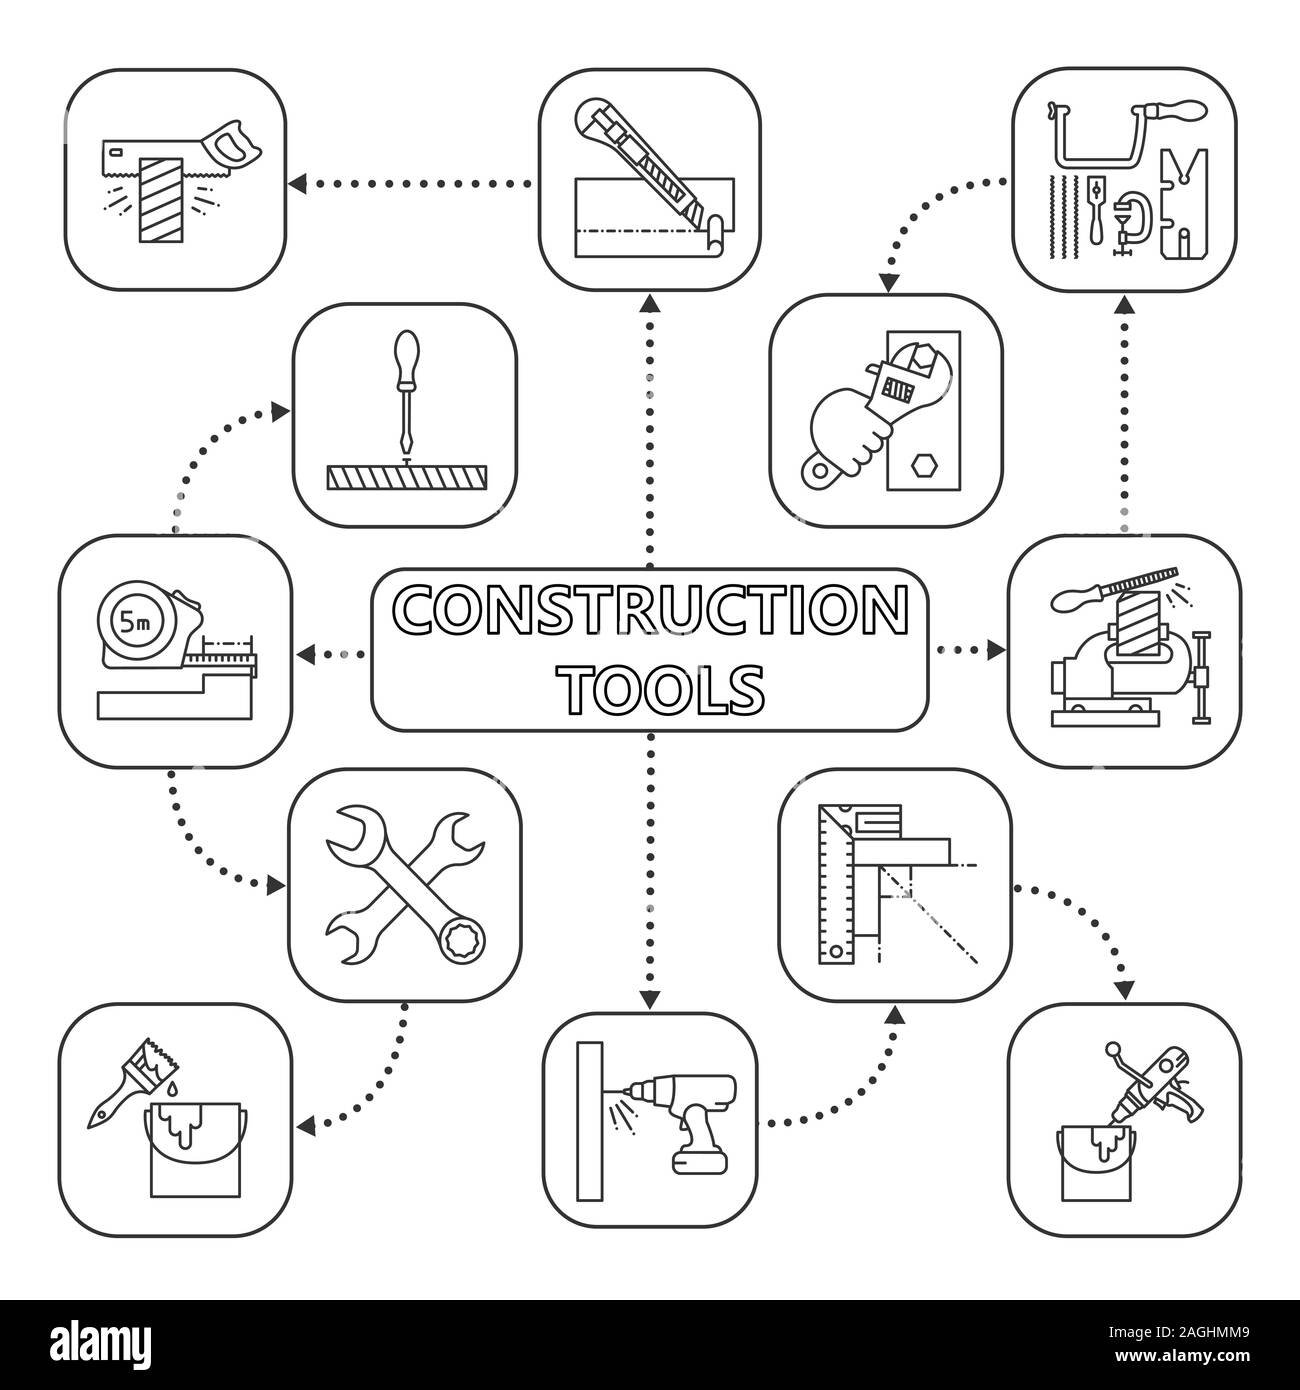 Construction tools mind map with linear icons. Tenon saw, meter, wrench, paint mixer, brush, bench vice. Concept scheme. Isolated vector illustration Stock Vector